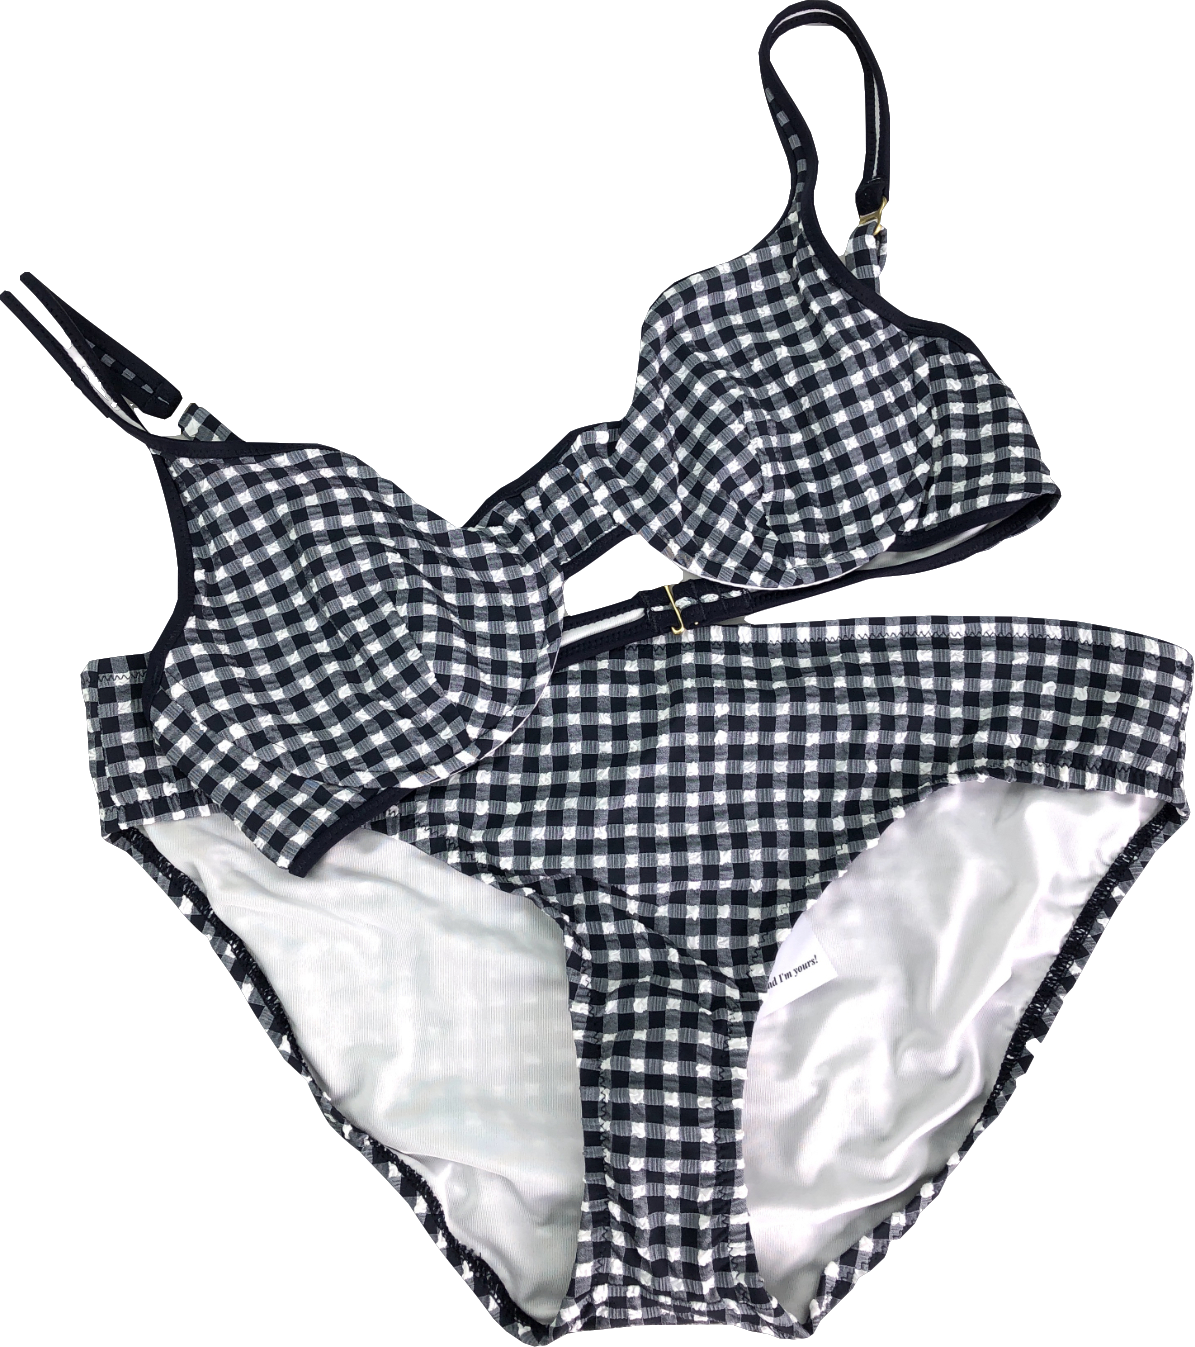 J Crew Blue Heritage Classic Underwired Gingham Bikini Top With Full Coverage Bottoms UK XL